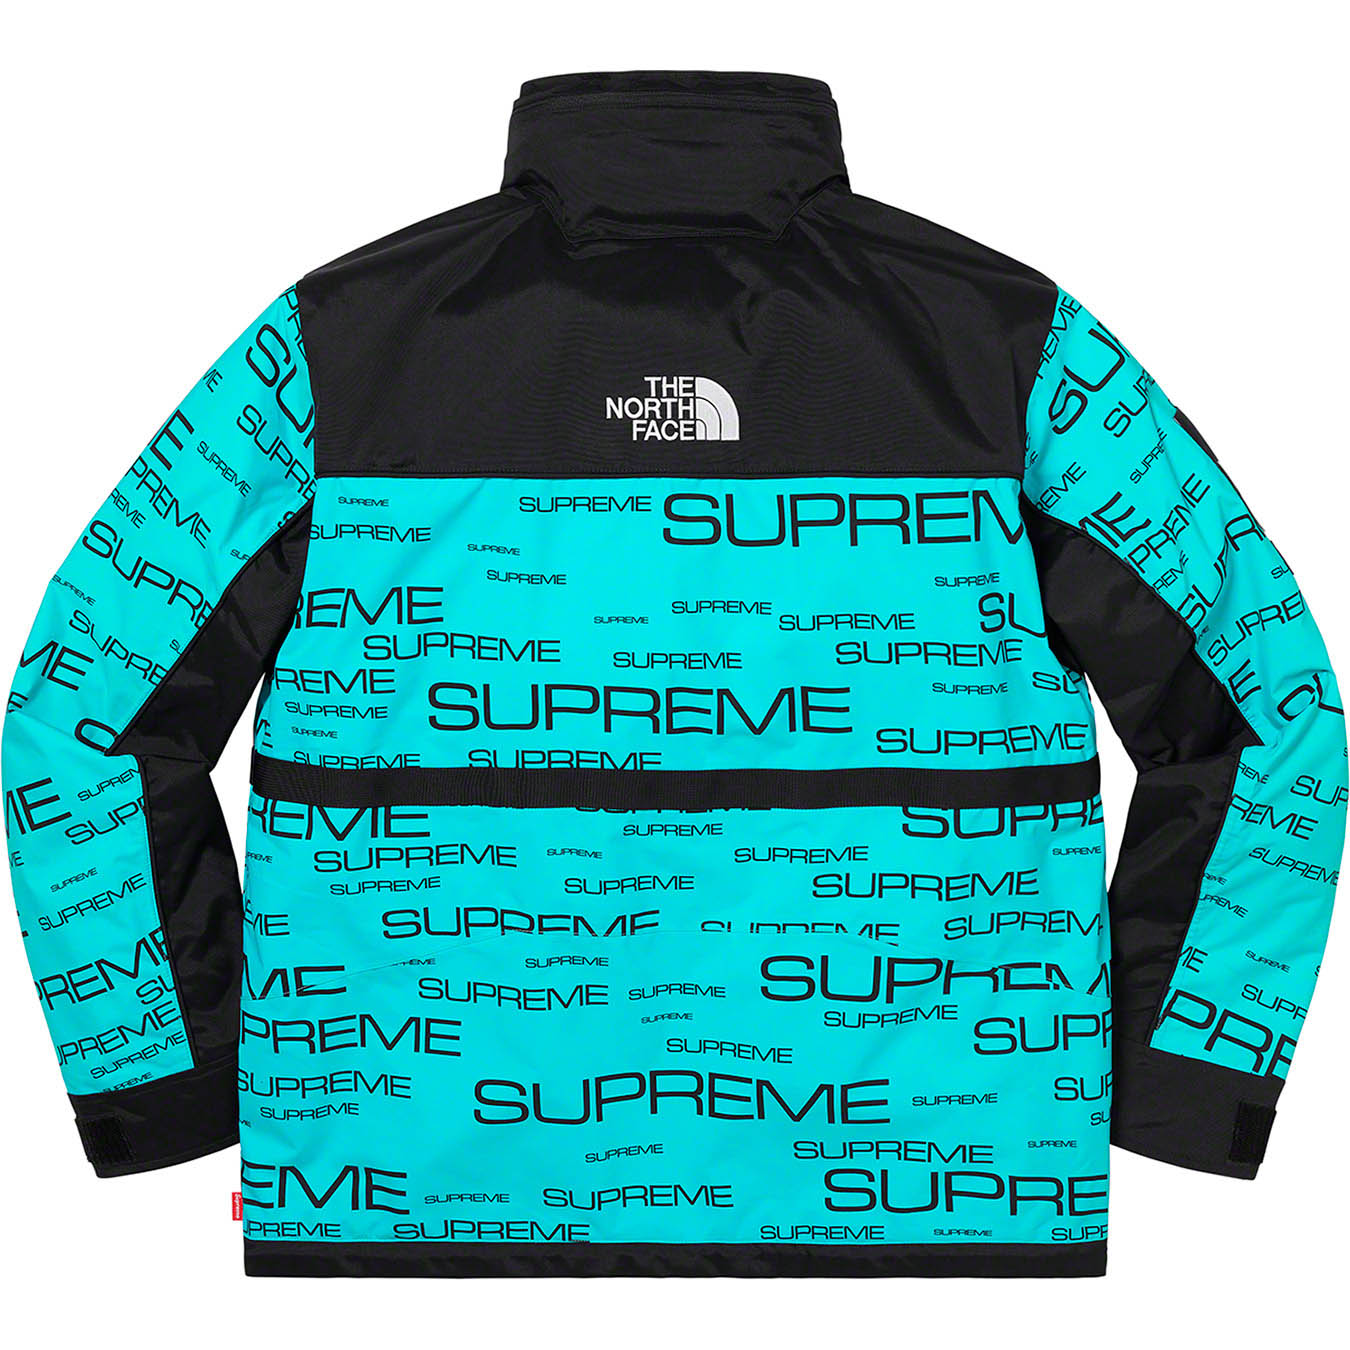 Supreme®/The North Face® Steep Tech Apogee Jacket | Supreme 21fw